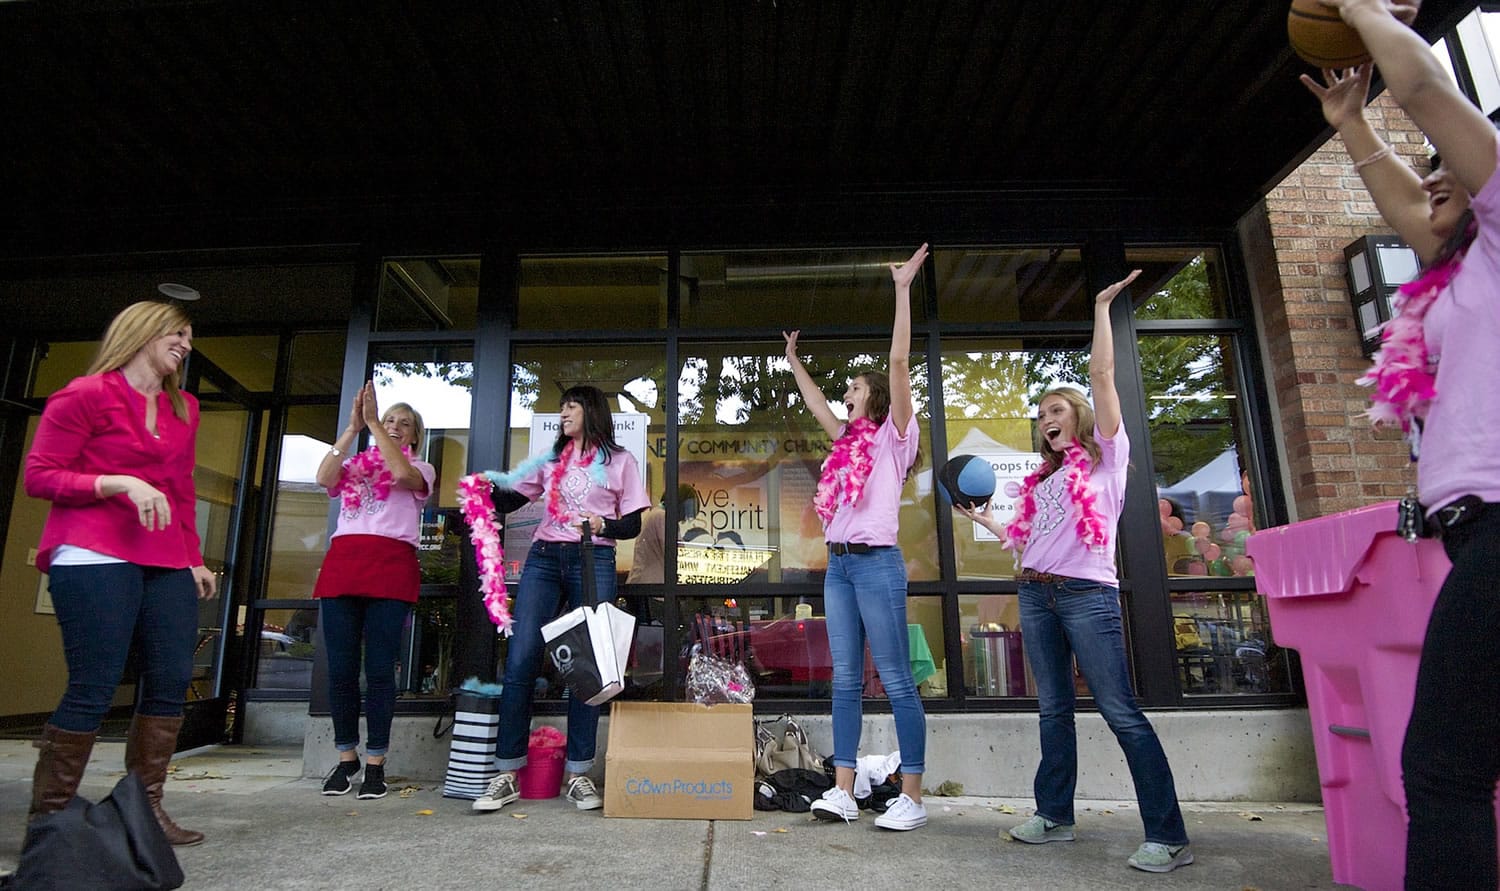 Shayna Hamilton, left, is cheered by members of the Camas High School girls basketball team after making a shot in to a pink recycling bin during the Downtown Camas Association's Girls' Night Out on Sept. 25.